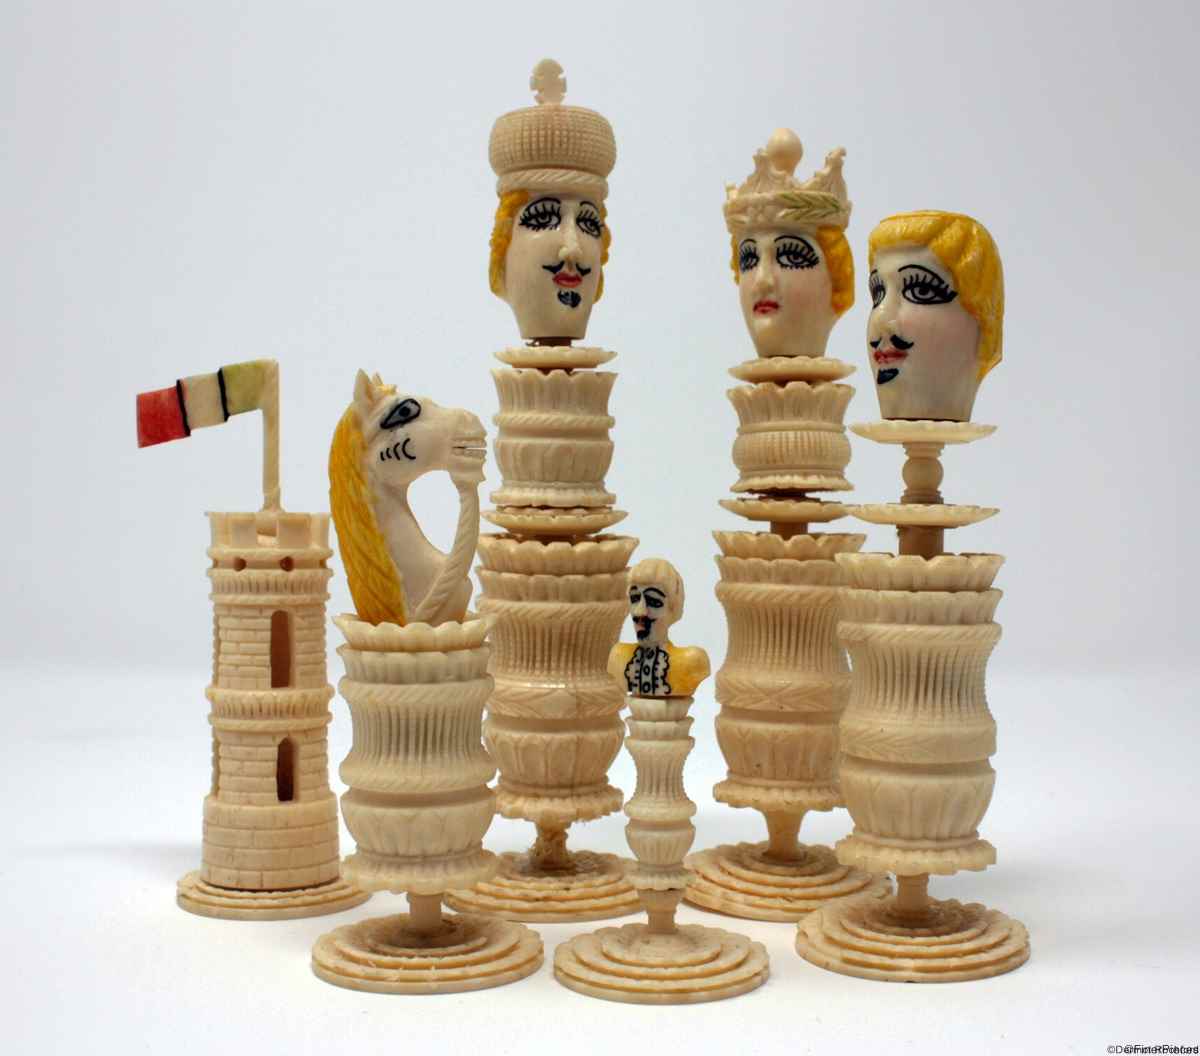 Antique Mexican Chess Set